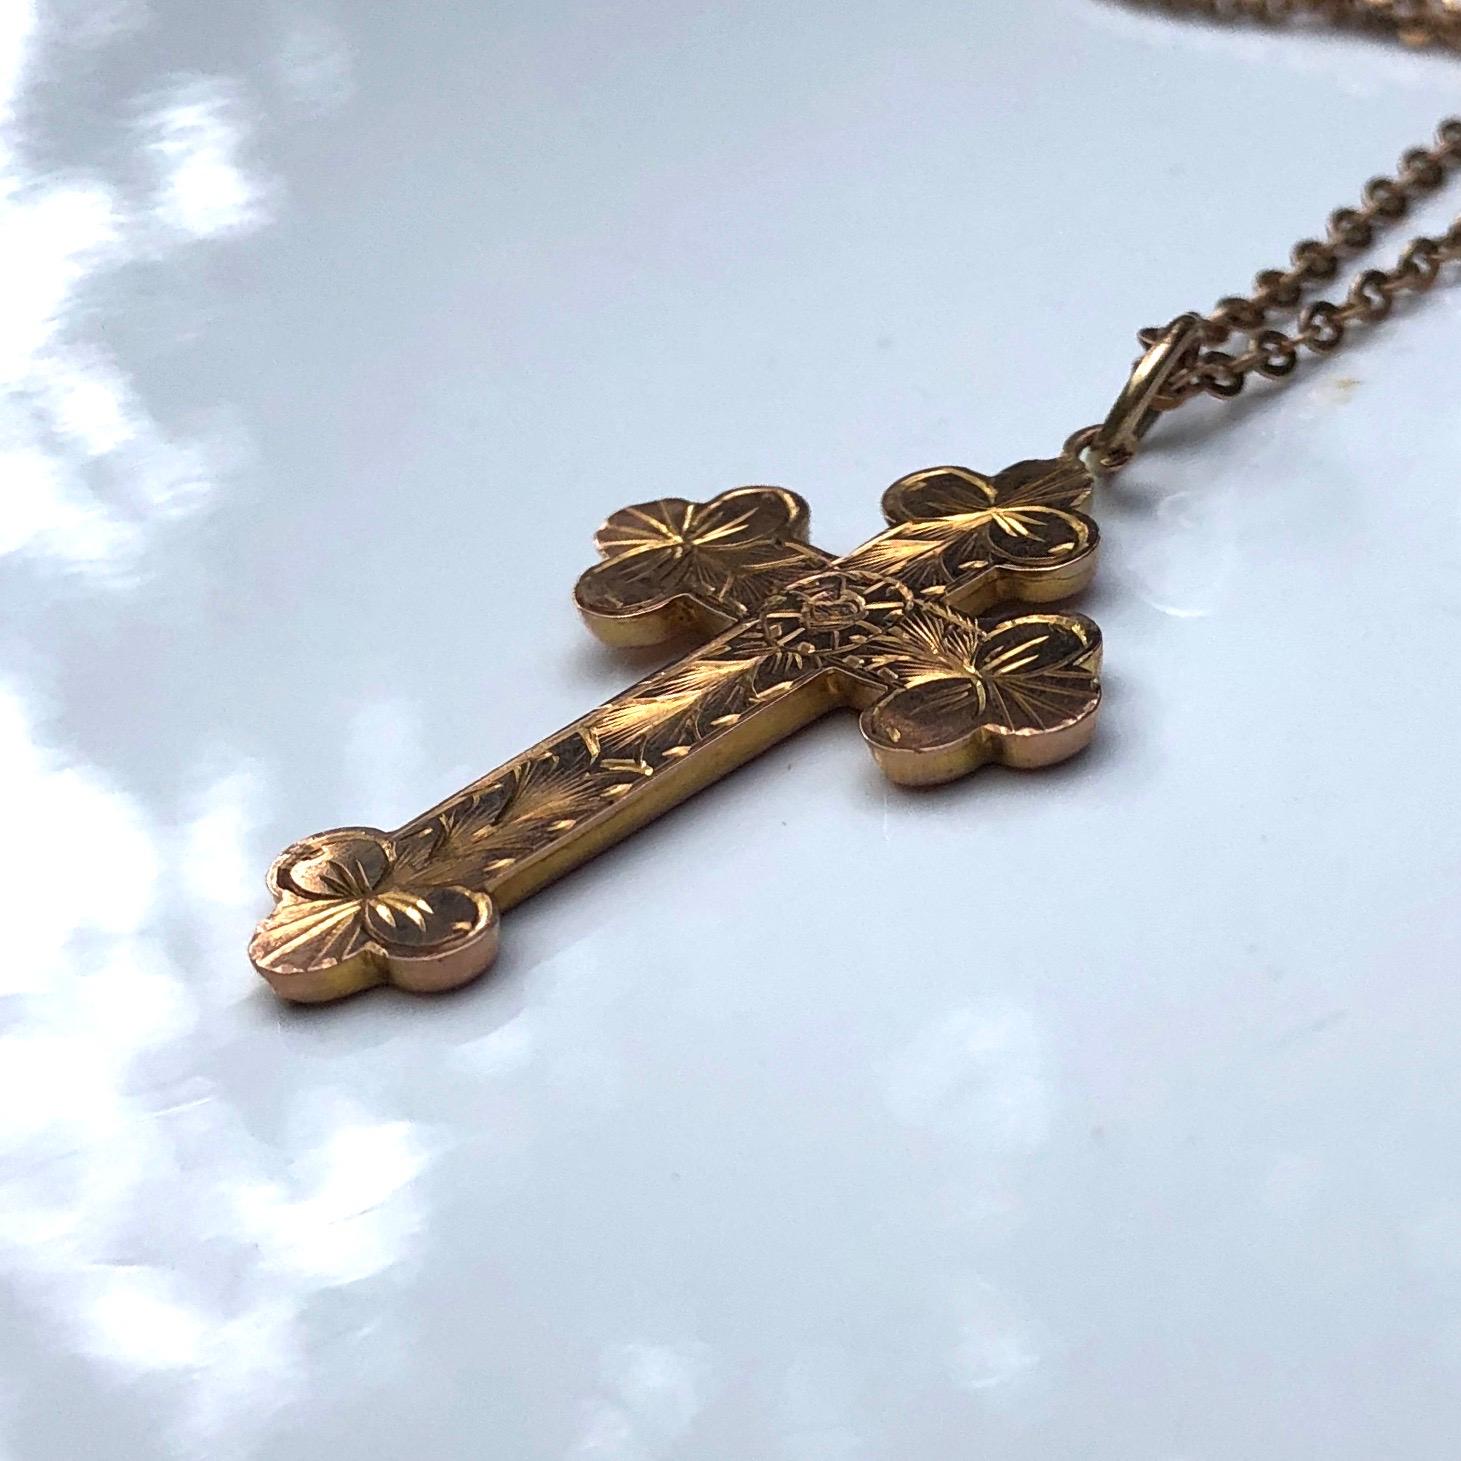 This finely engraved cross and classic chain are gorgeous. The back of the cross is smooth with the hall mark so you could wear it with the engraved detail or the smooth simple side showing. Modelled in 9ct gold. 

Length: 47cm 
Cross Dimensions: